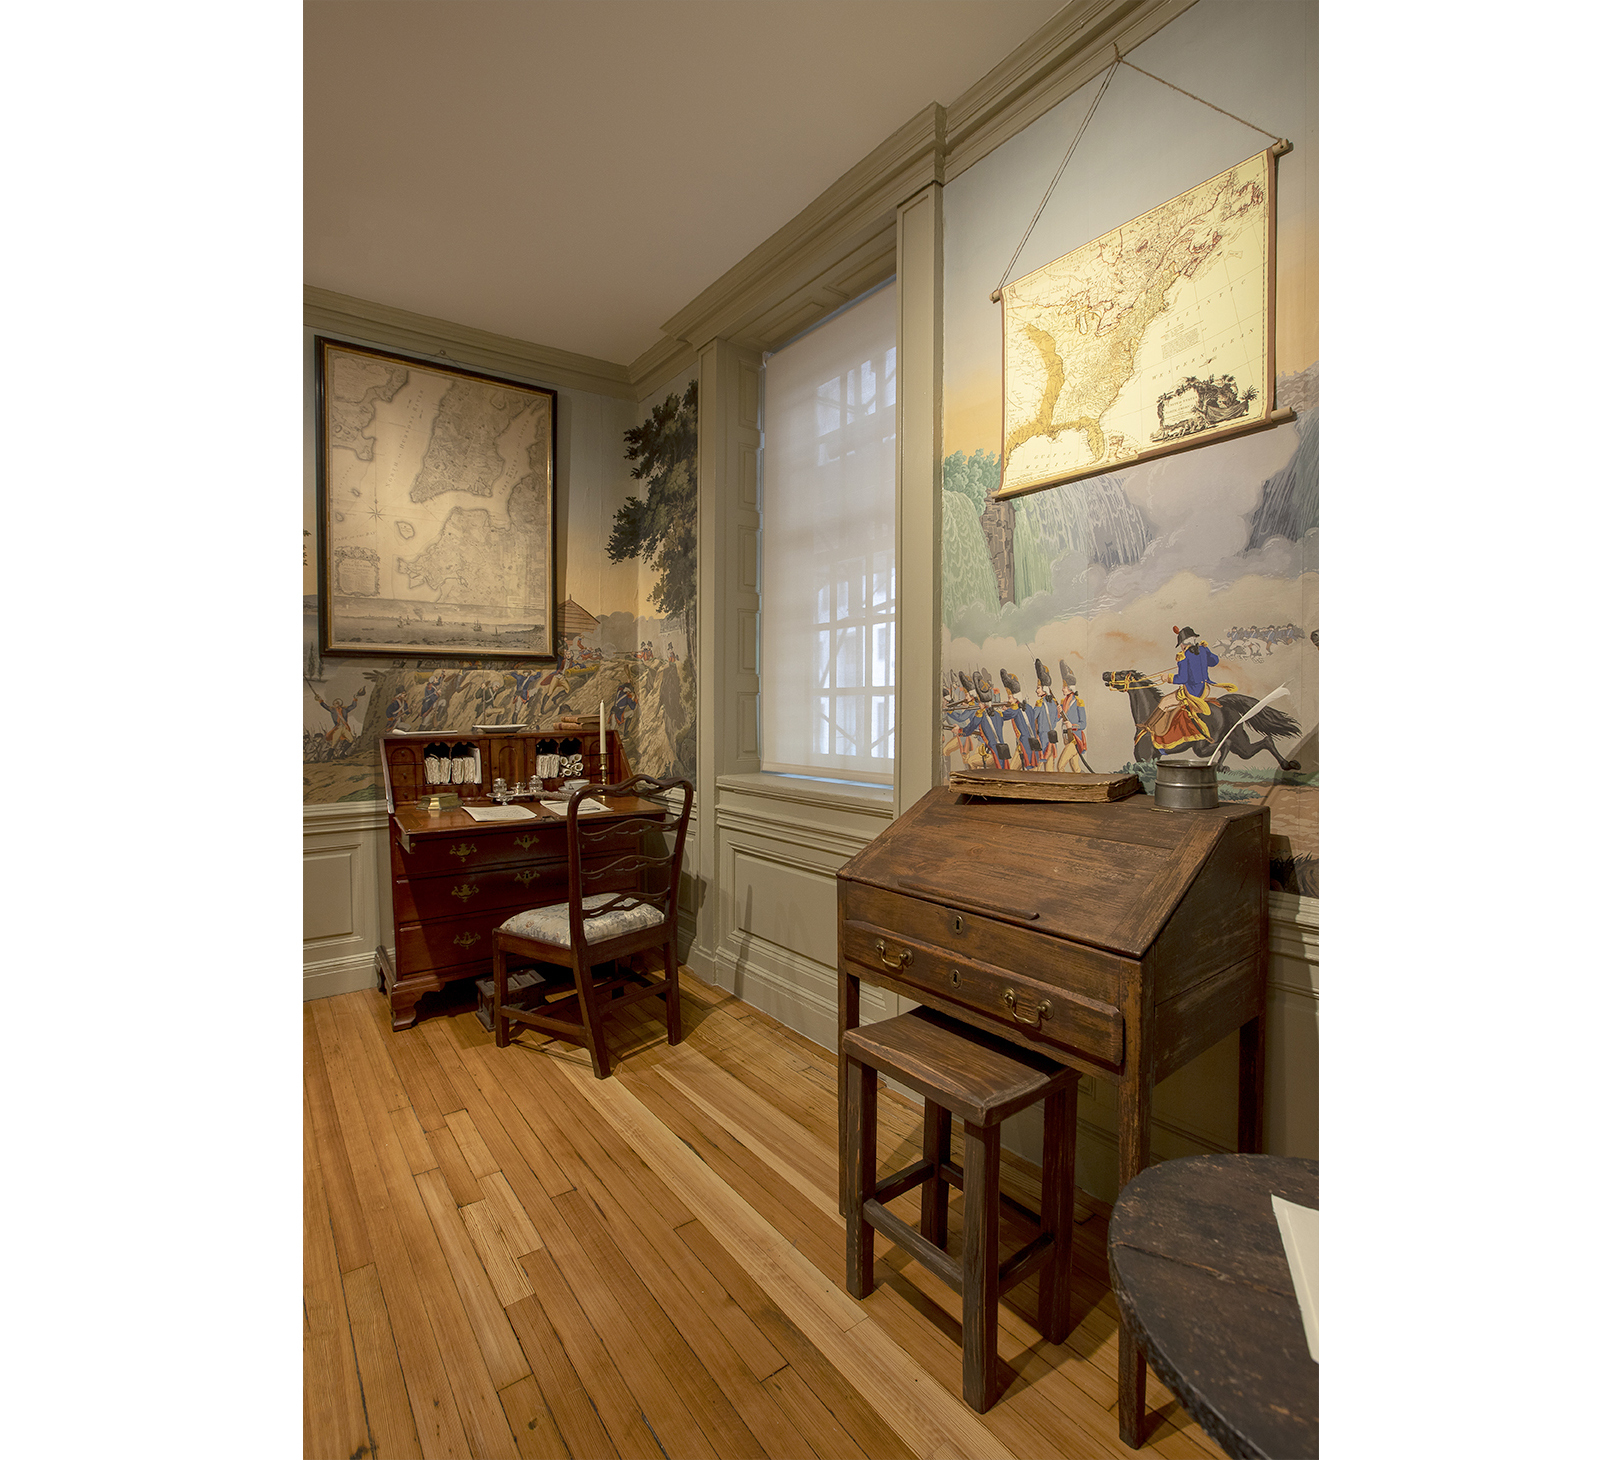 Another interior from the new permanent exhibit Governing the Nation from Fraunces Tavern. Image courtesy of Fraunces Tavern® Museum